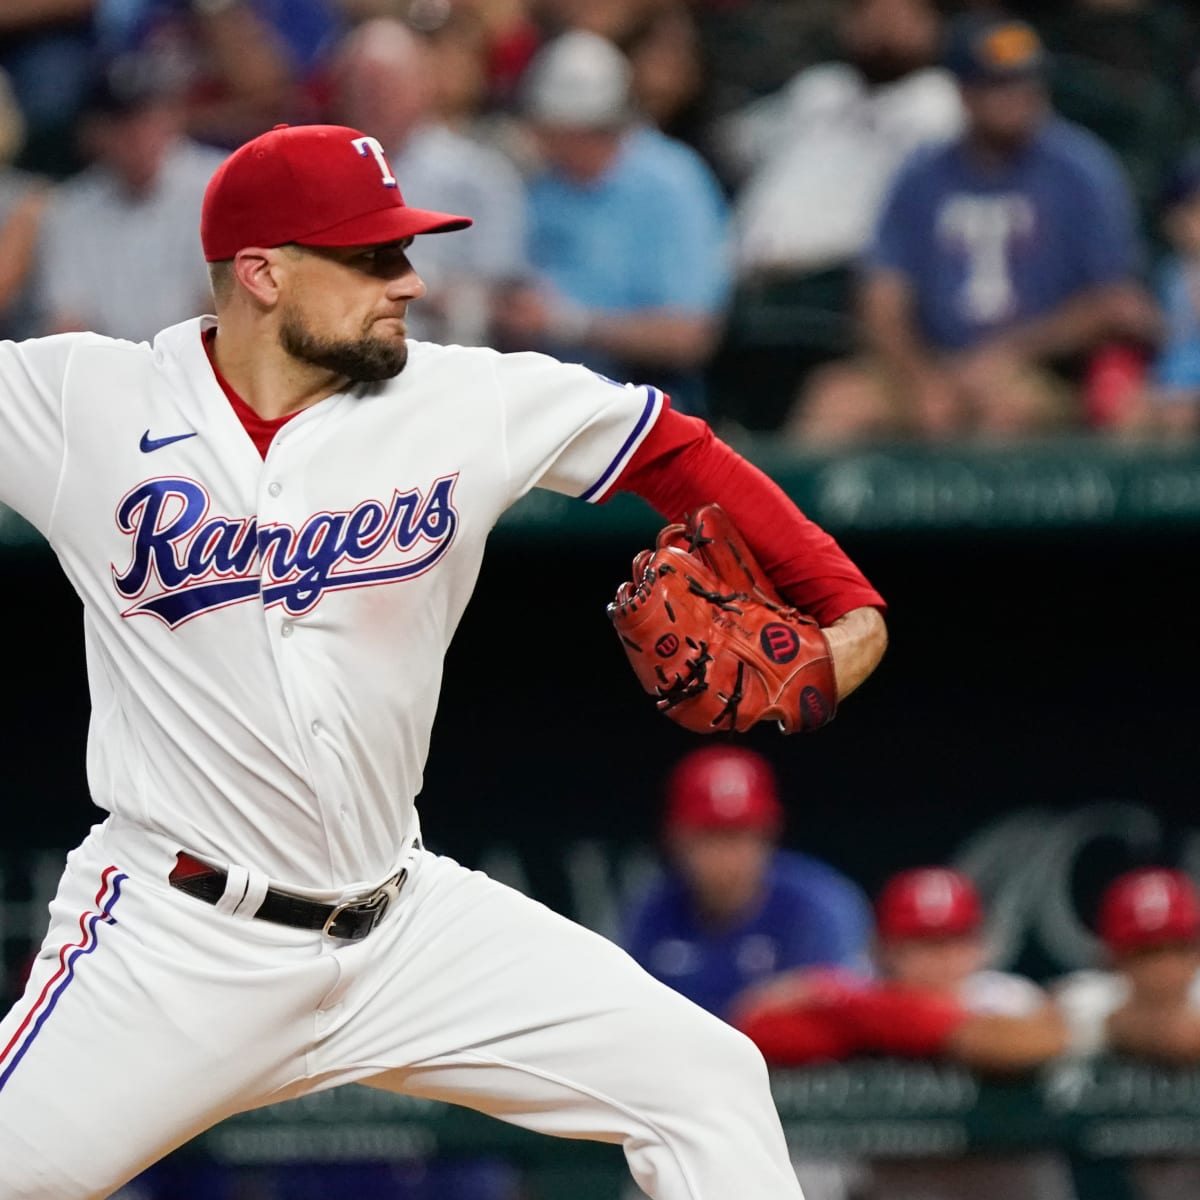 Esports on X: On 9/20 at the Texas @Rangers baseball game, the